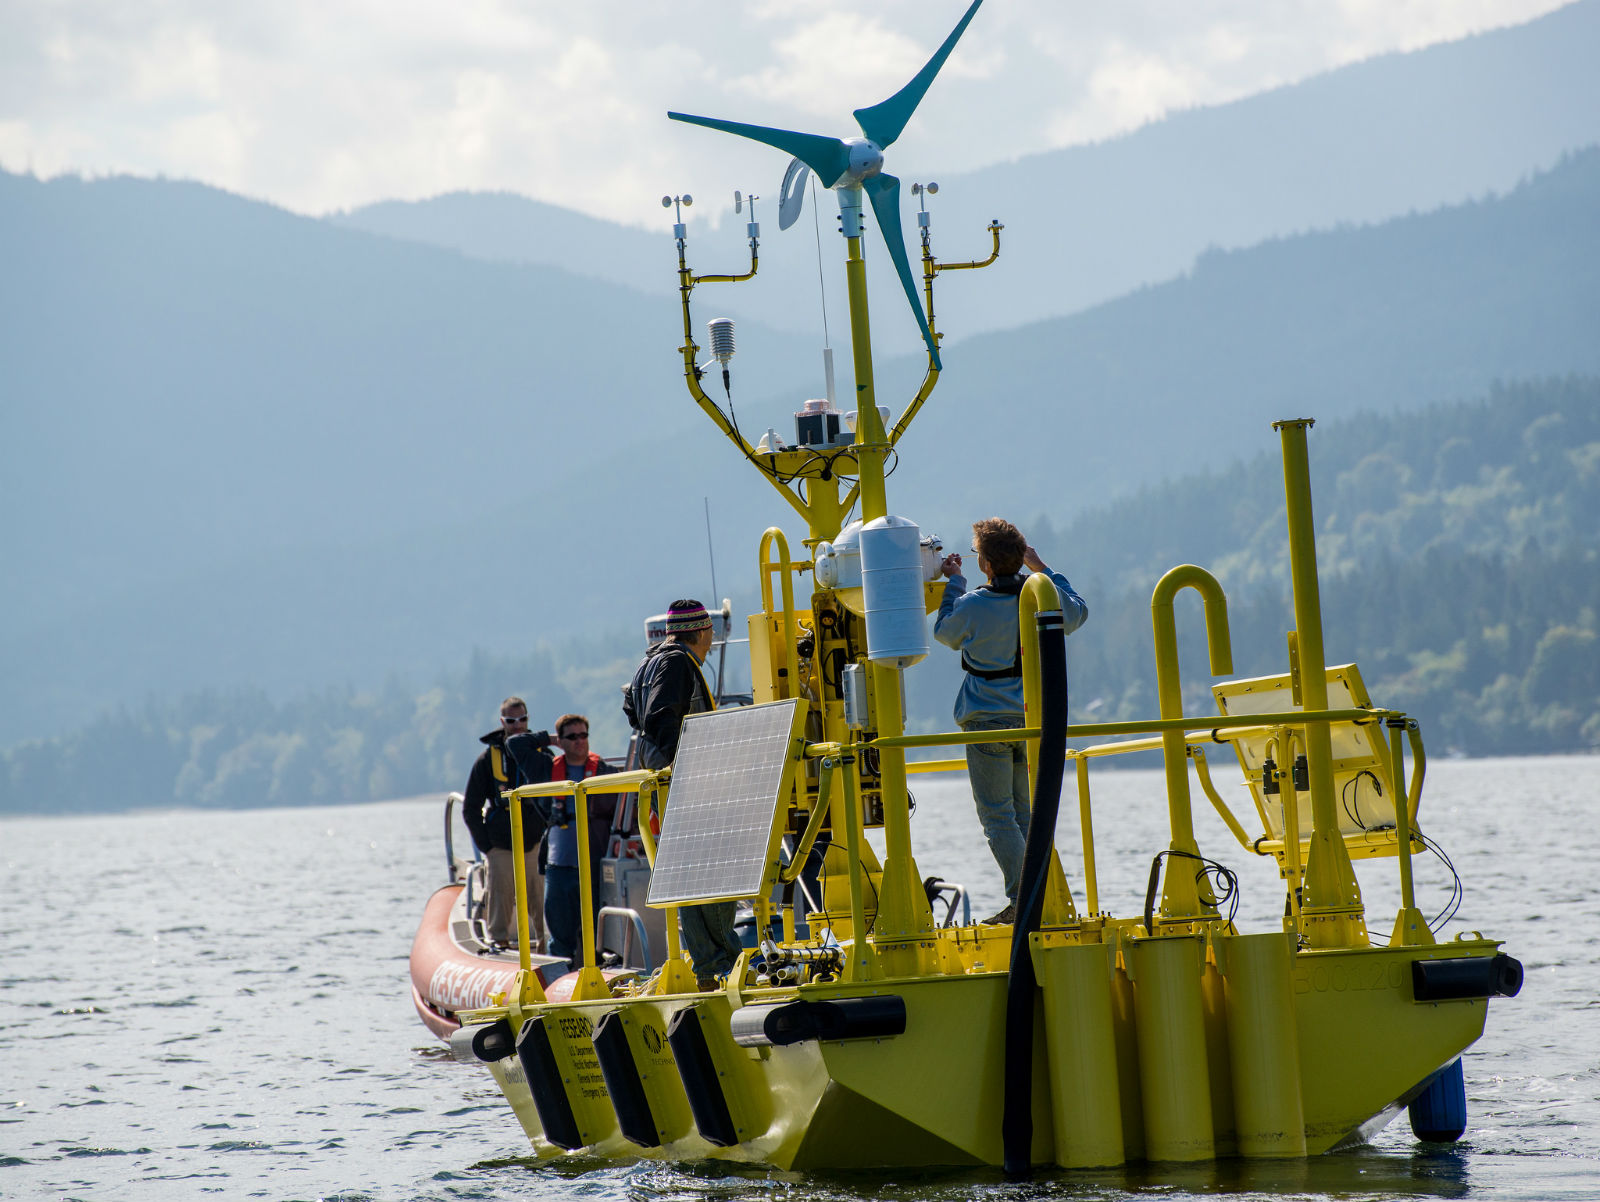 Monster Machines: A Million-Dollar Buoy Will Spot The Best Sites For Wind Farms